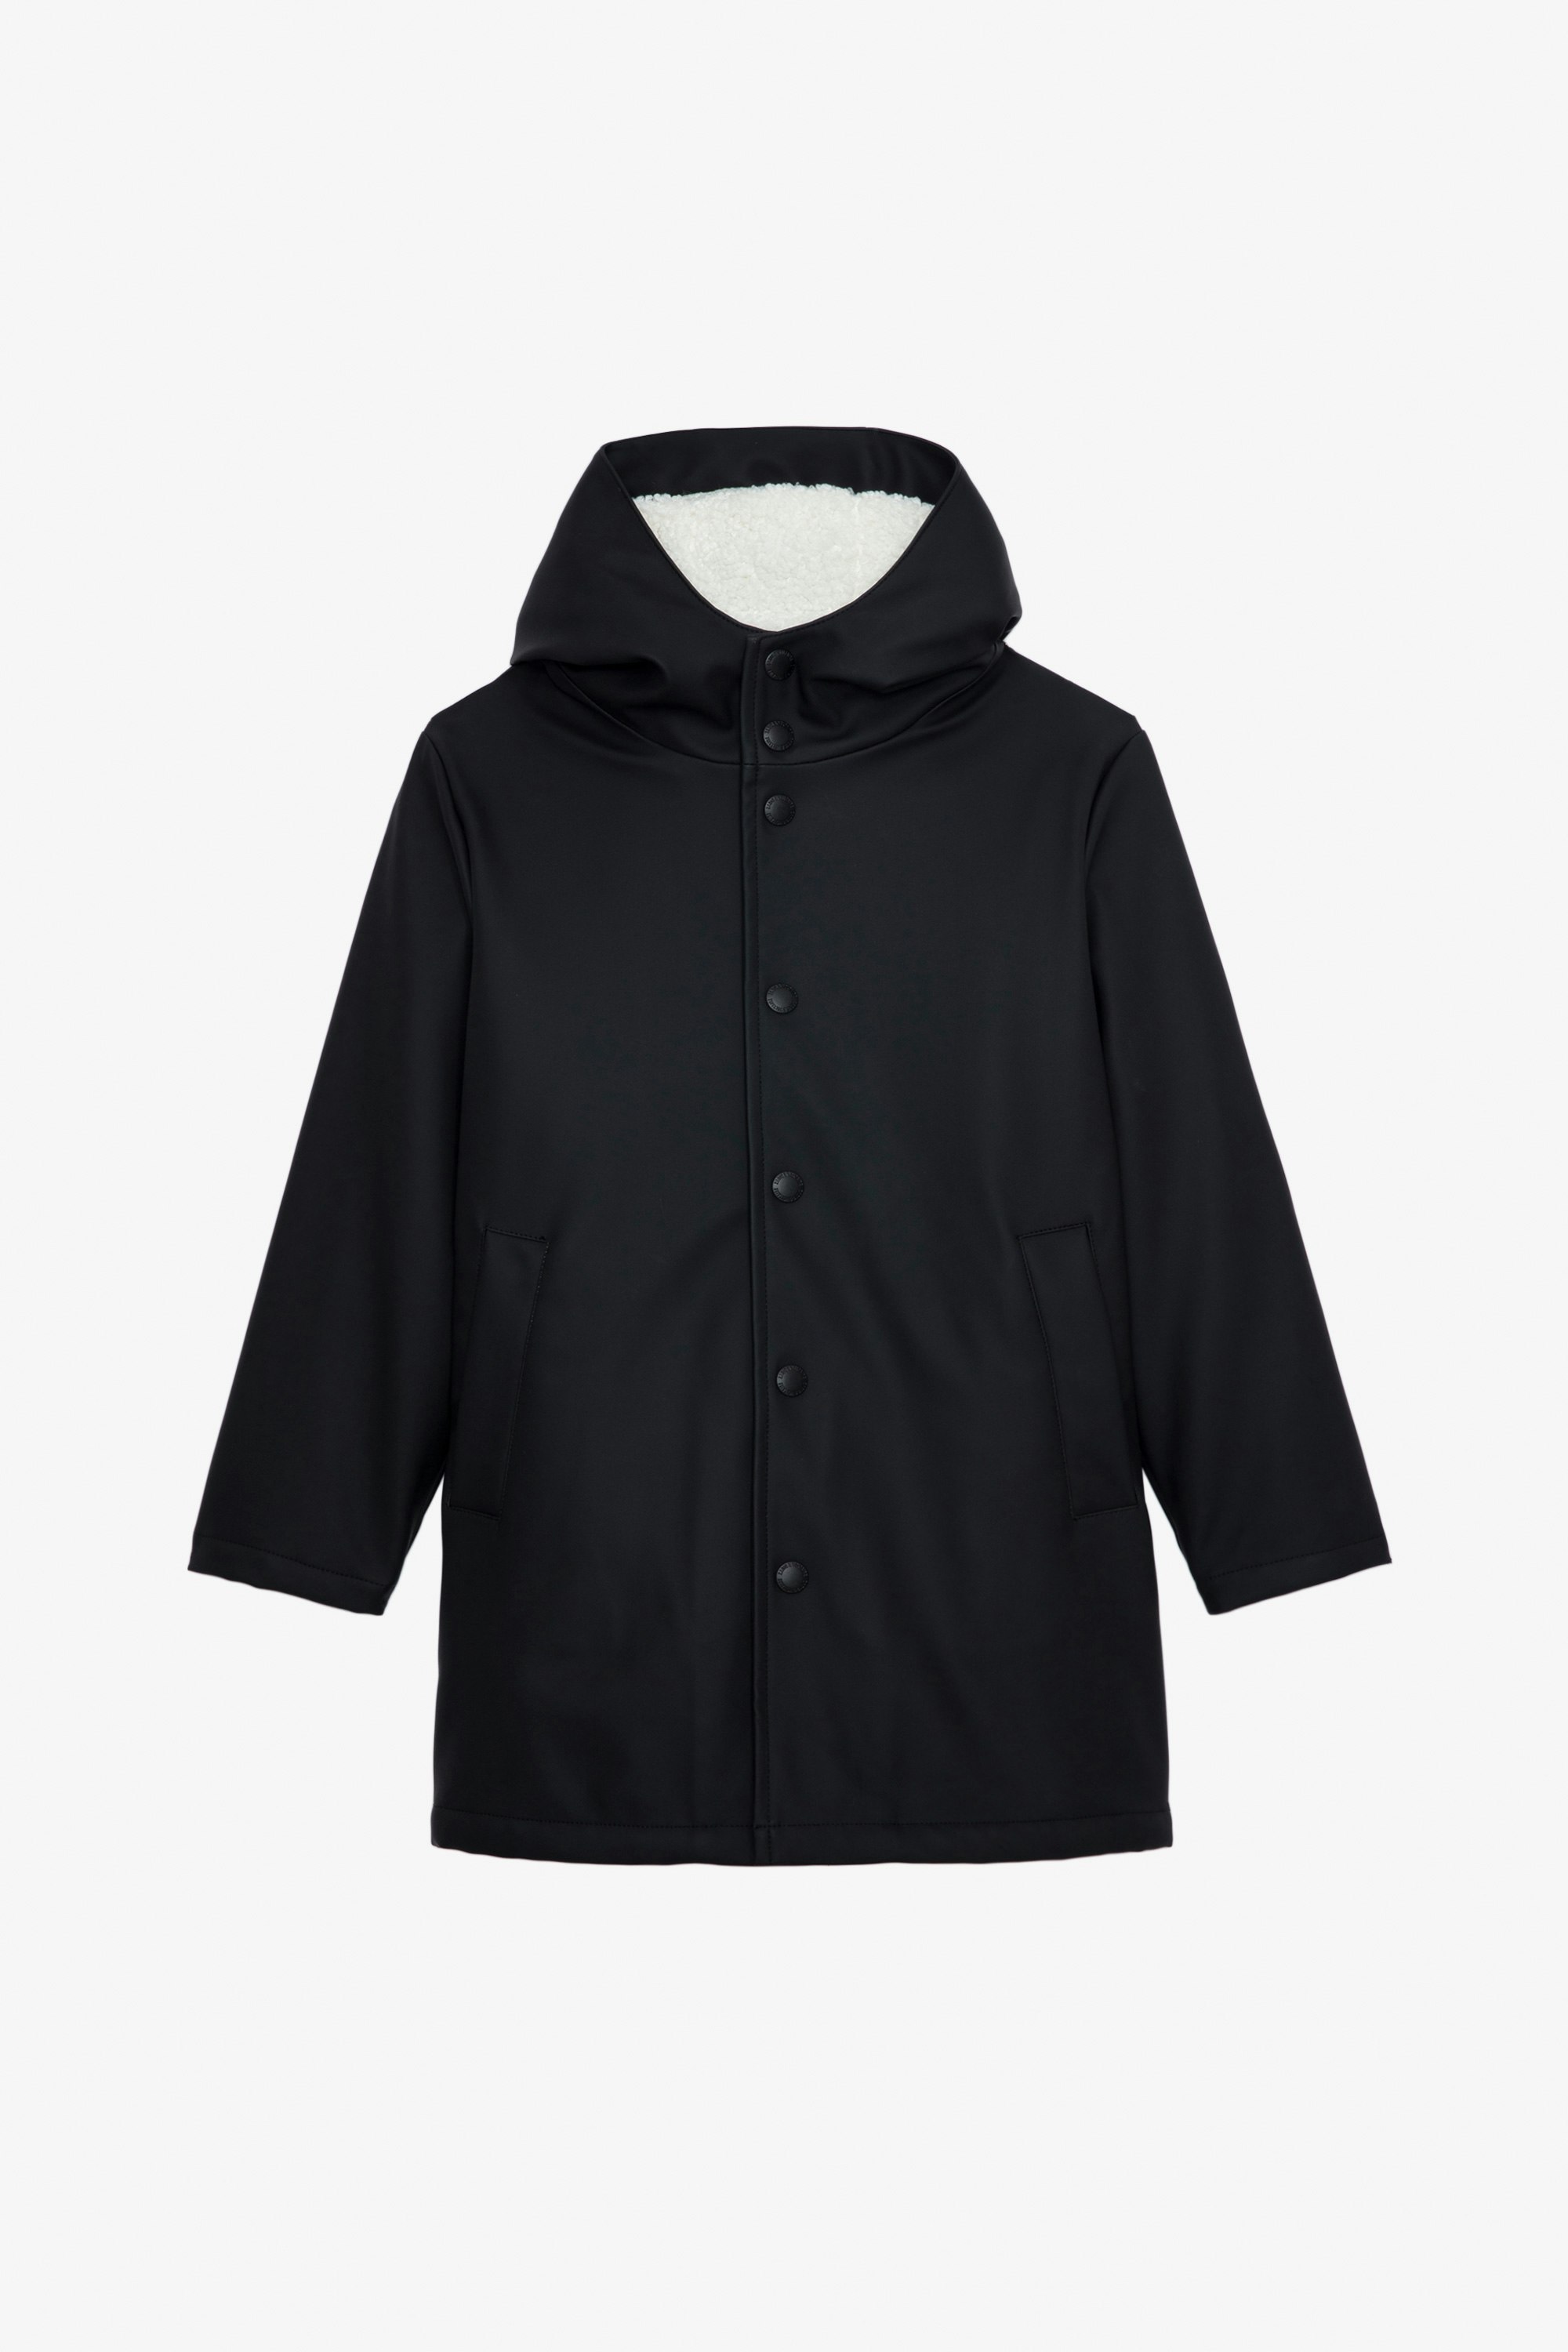 Dylan Boys’ Waxed Raincoat - Boys’ black water-repellent hooded waxed raincoat with lining and arrow motifs on the back.